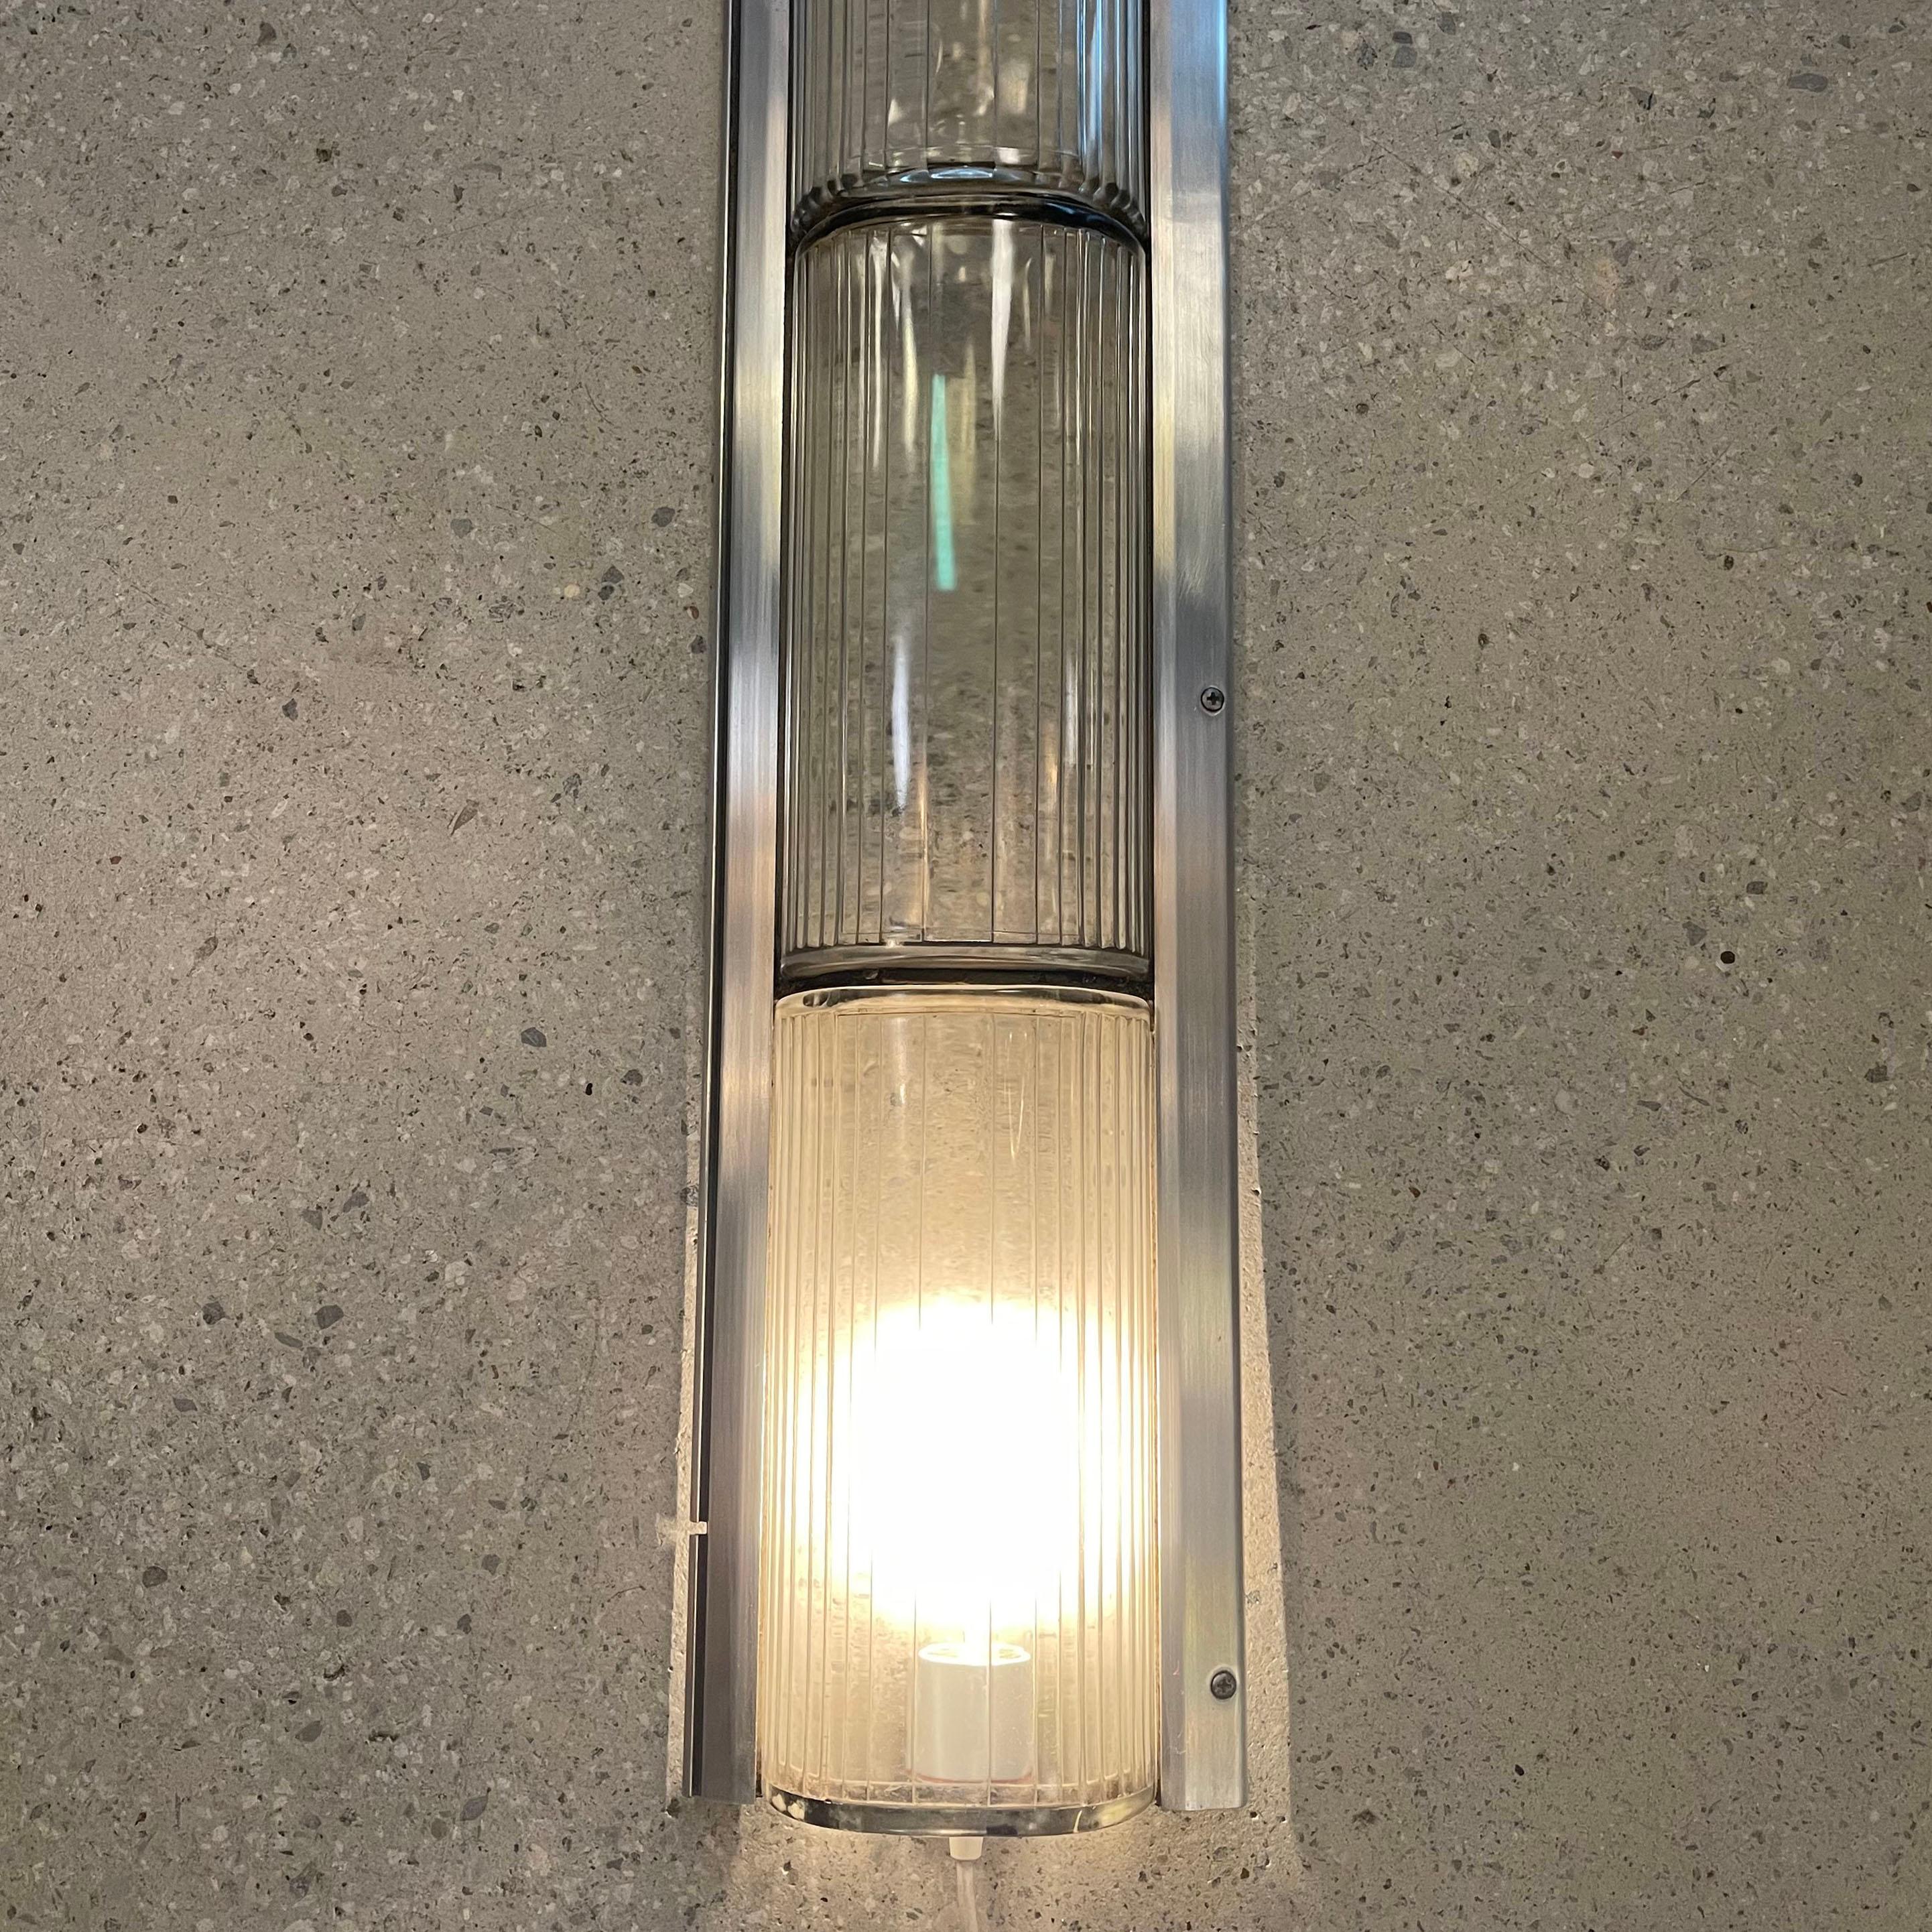 20th Century Art Deco Aluminum And Pyrex Glass Subway Light Covers For Sale